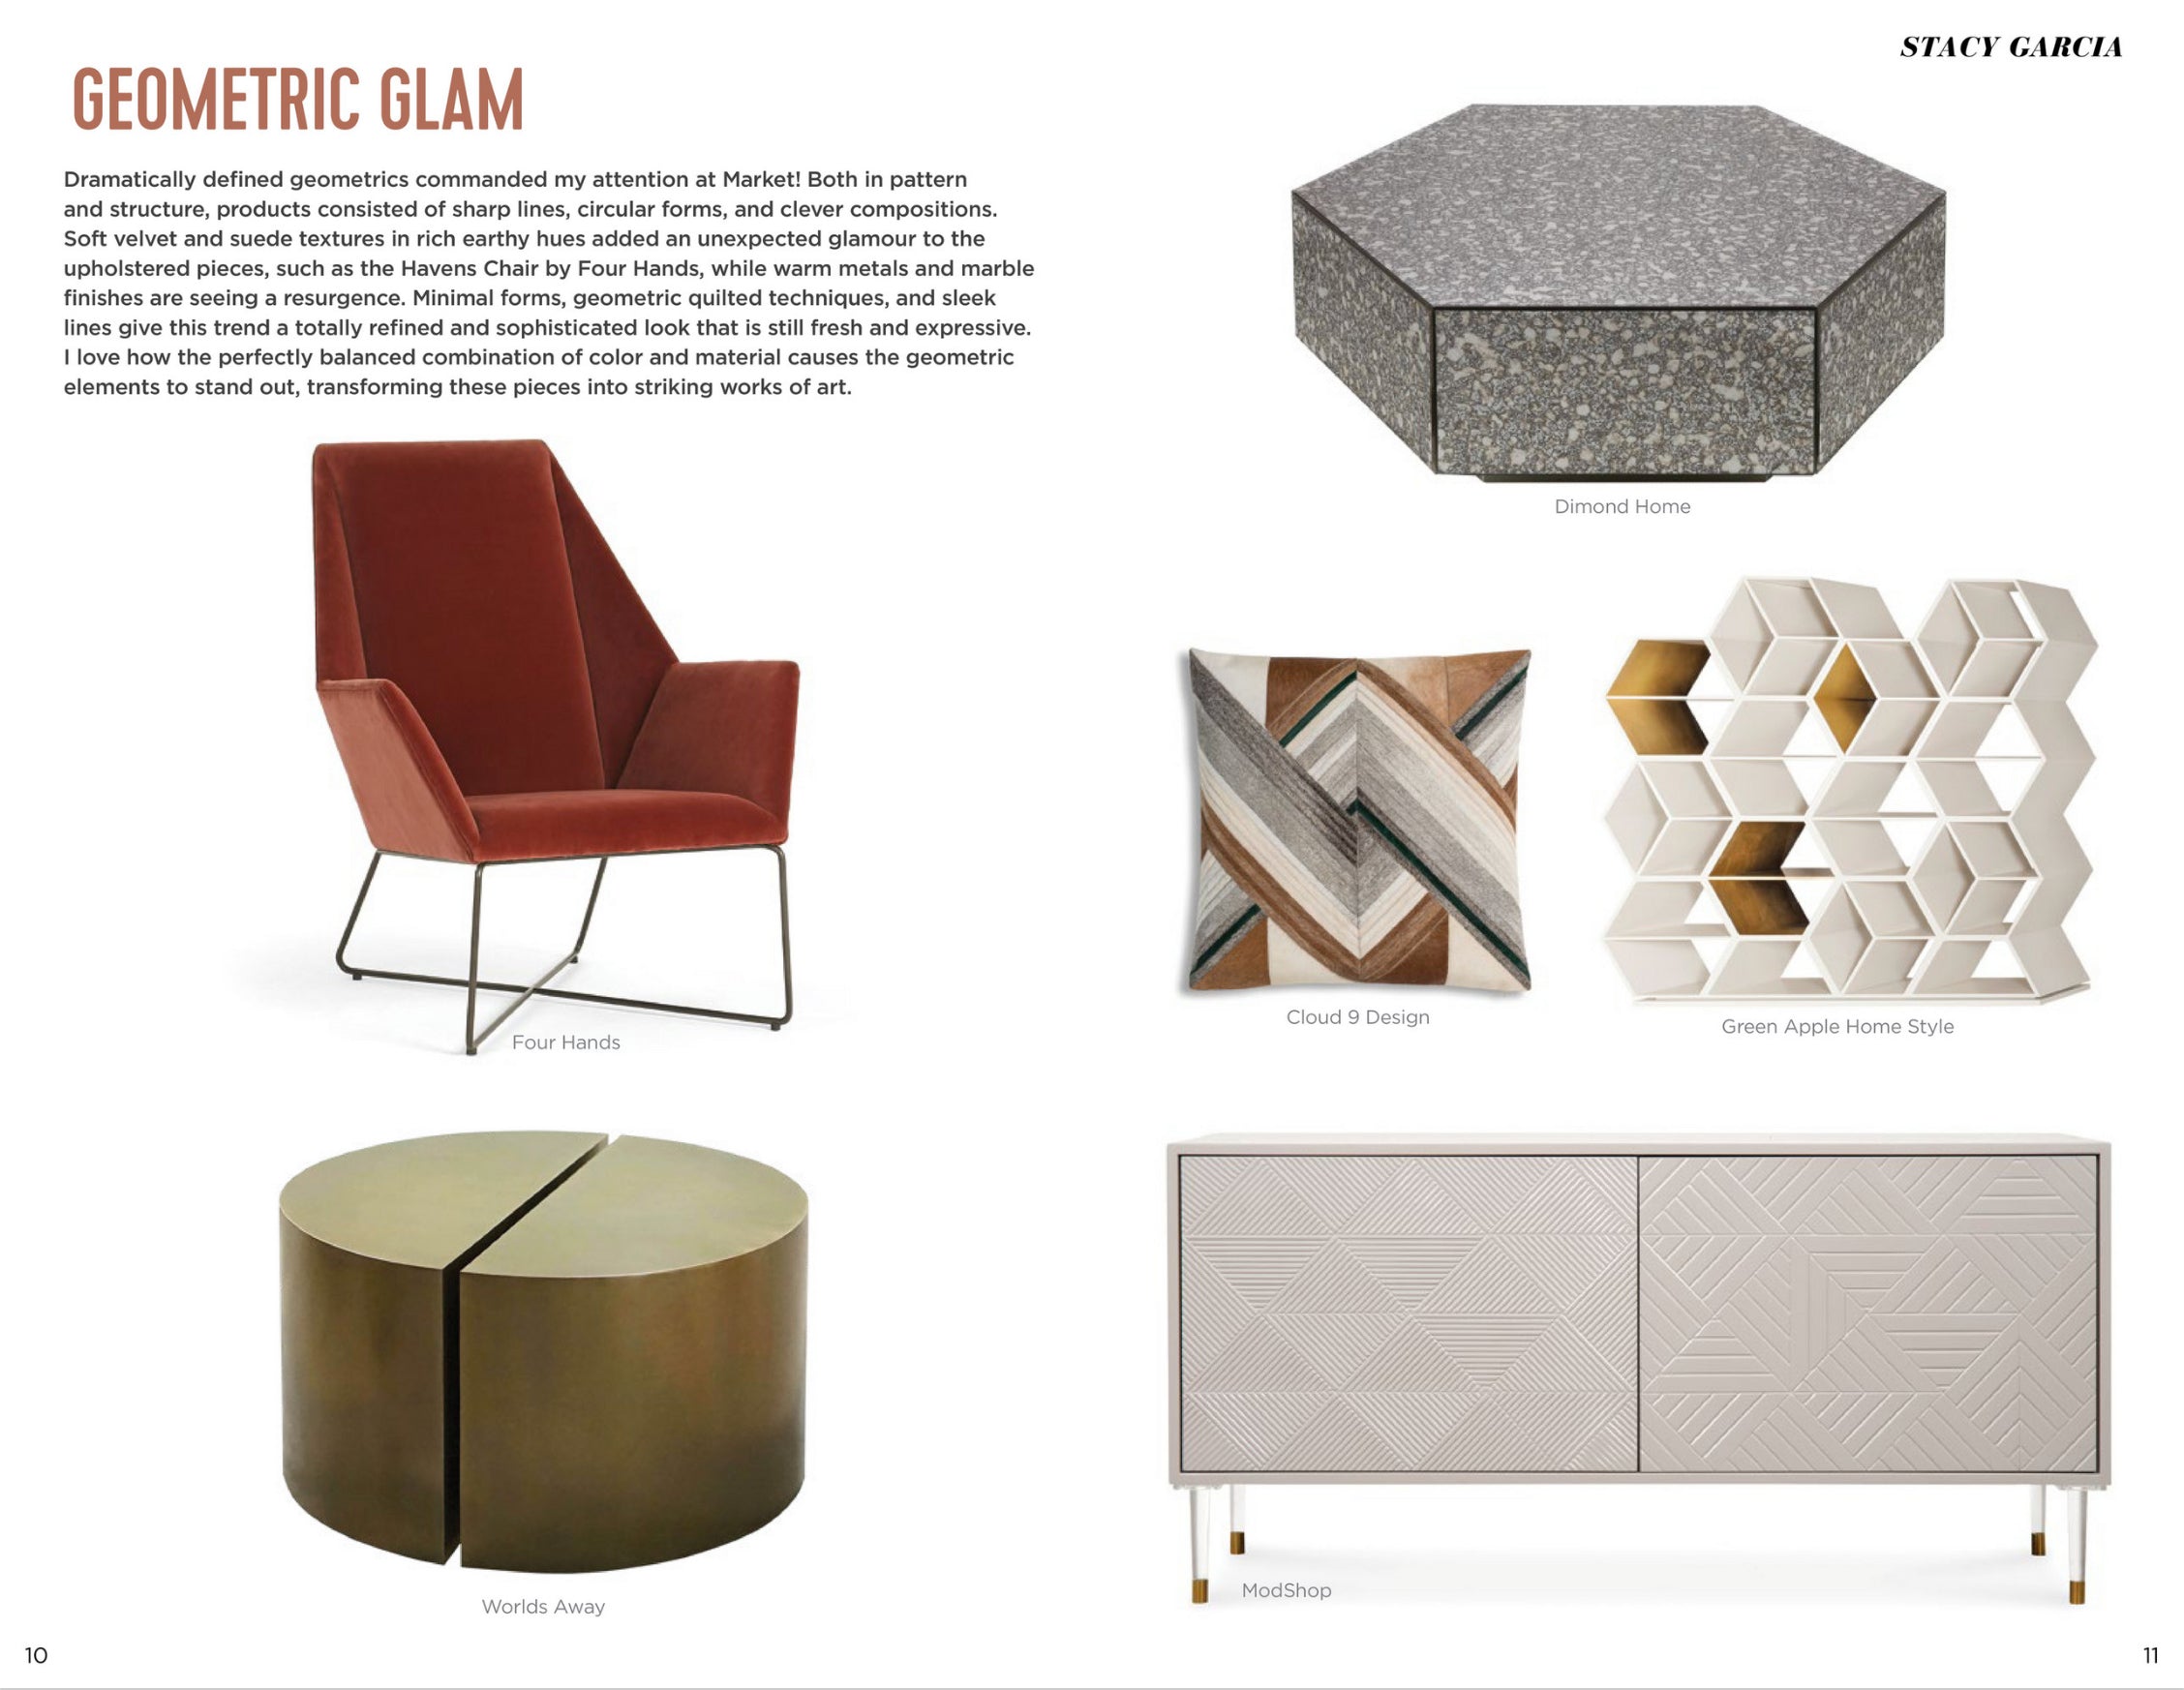 high point market style report article geometric glam by stacy garcia featuring modshop's monaco petite credenza in smoke ember